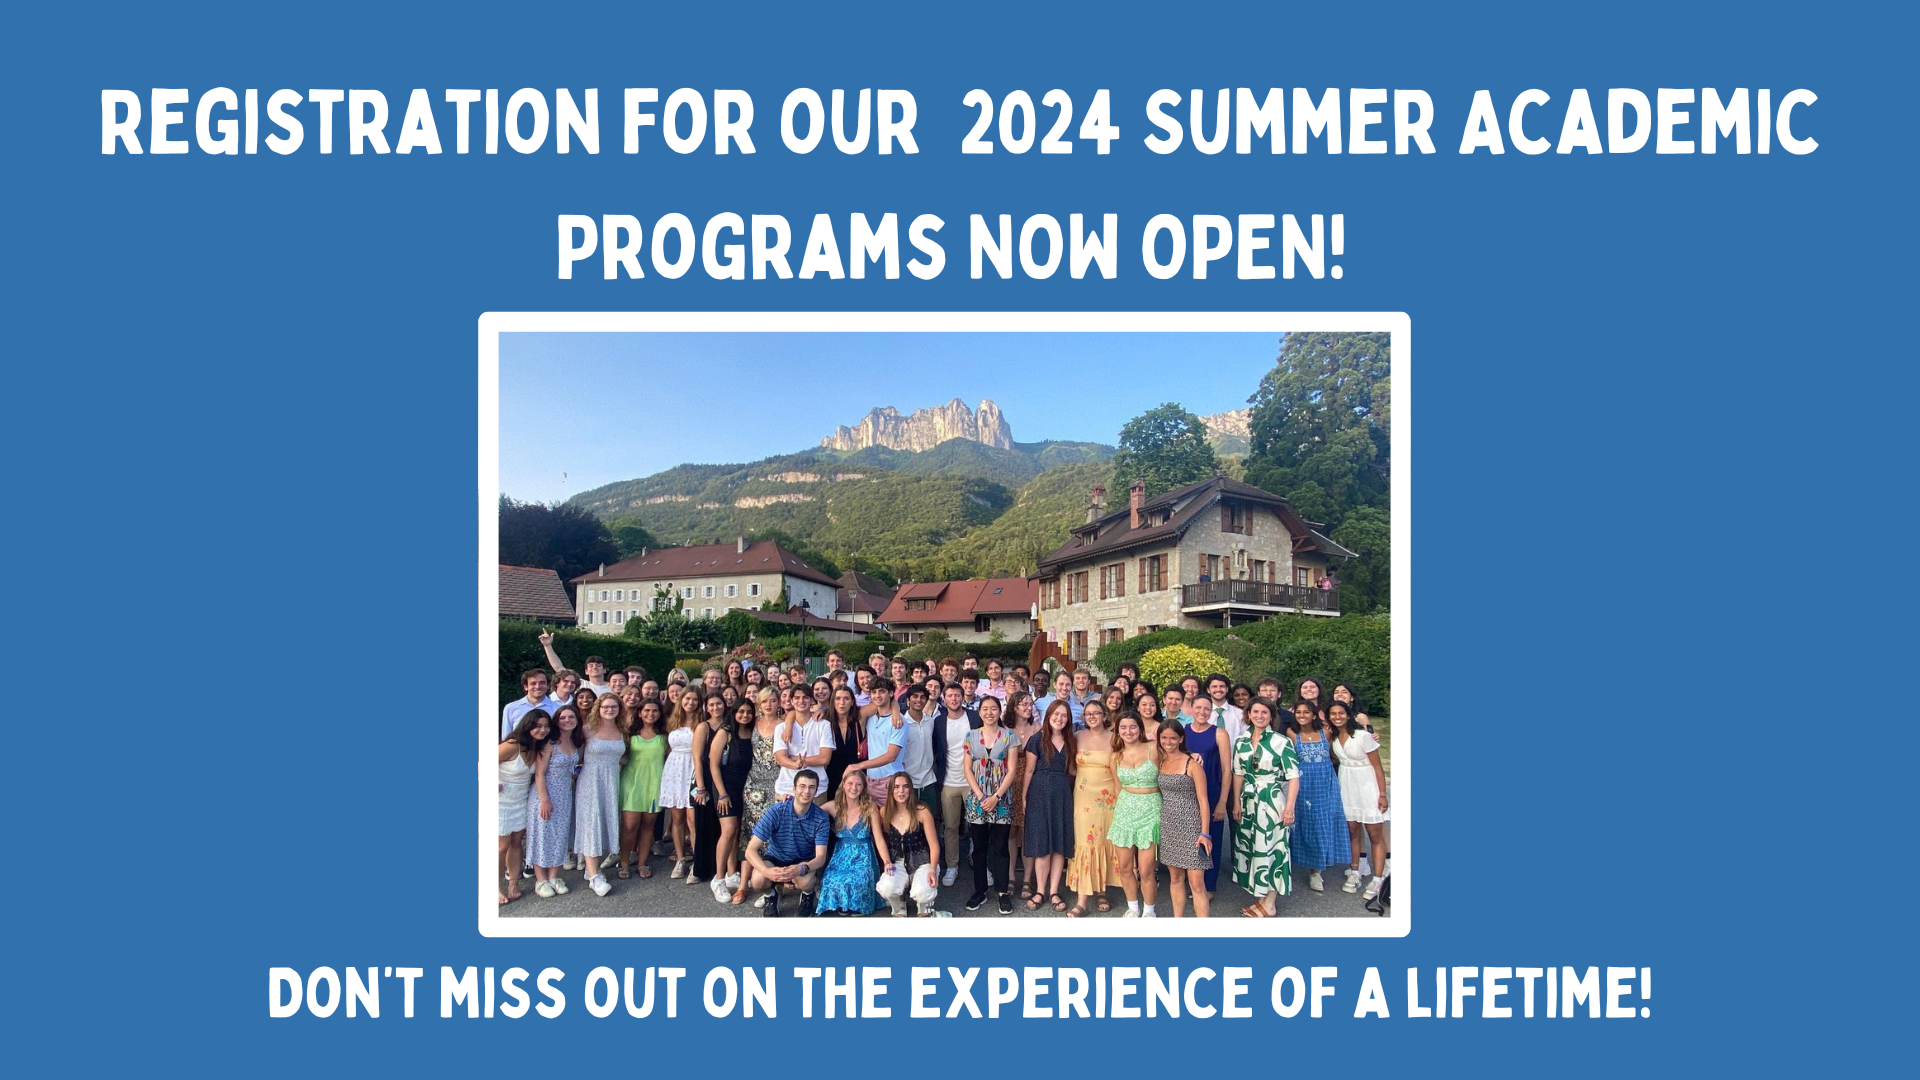 Applications OPEN for Summer 2024!